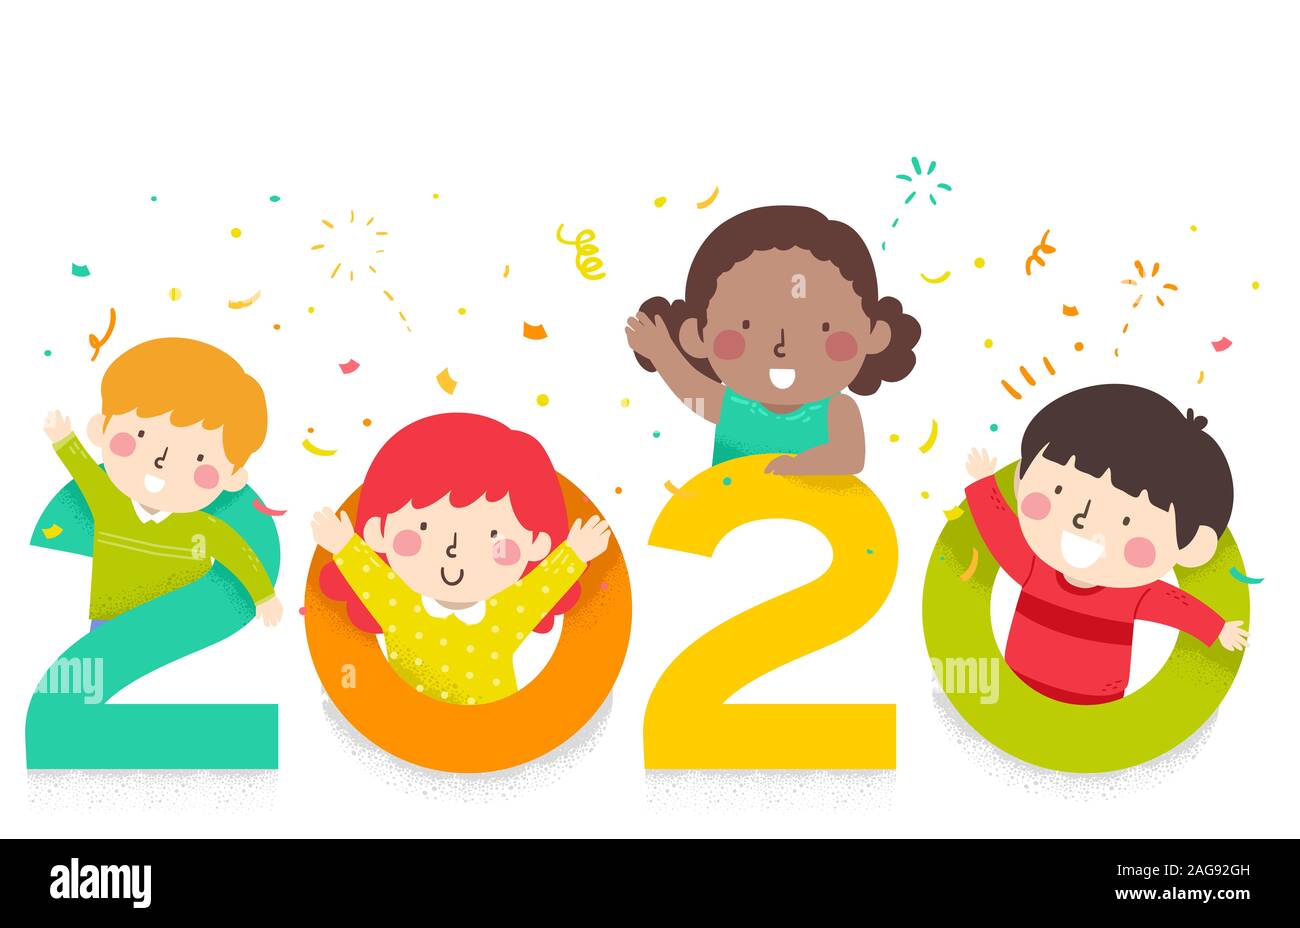 Illustration of Kids Waving and Welcoming the New Year 2020 with Confetti Stock Photo